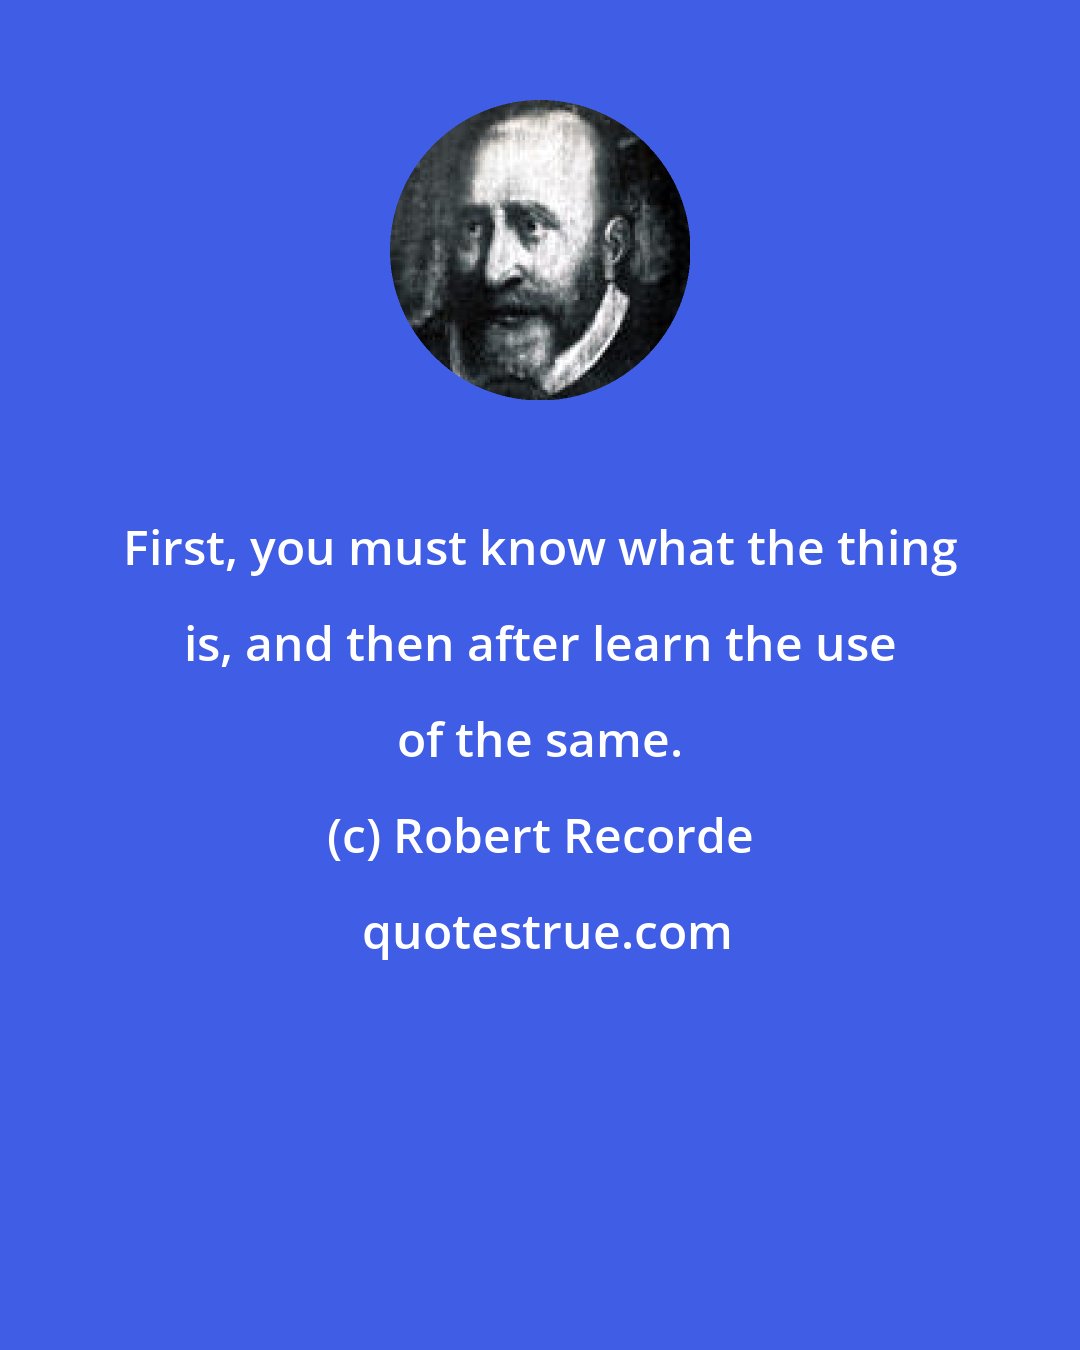 Robert Recorde: First, you must know what the thing is, and then after learn the use of the same.